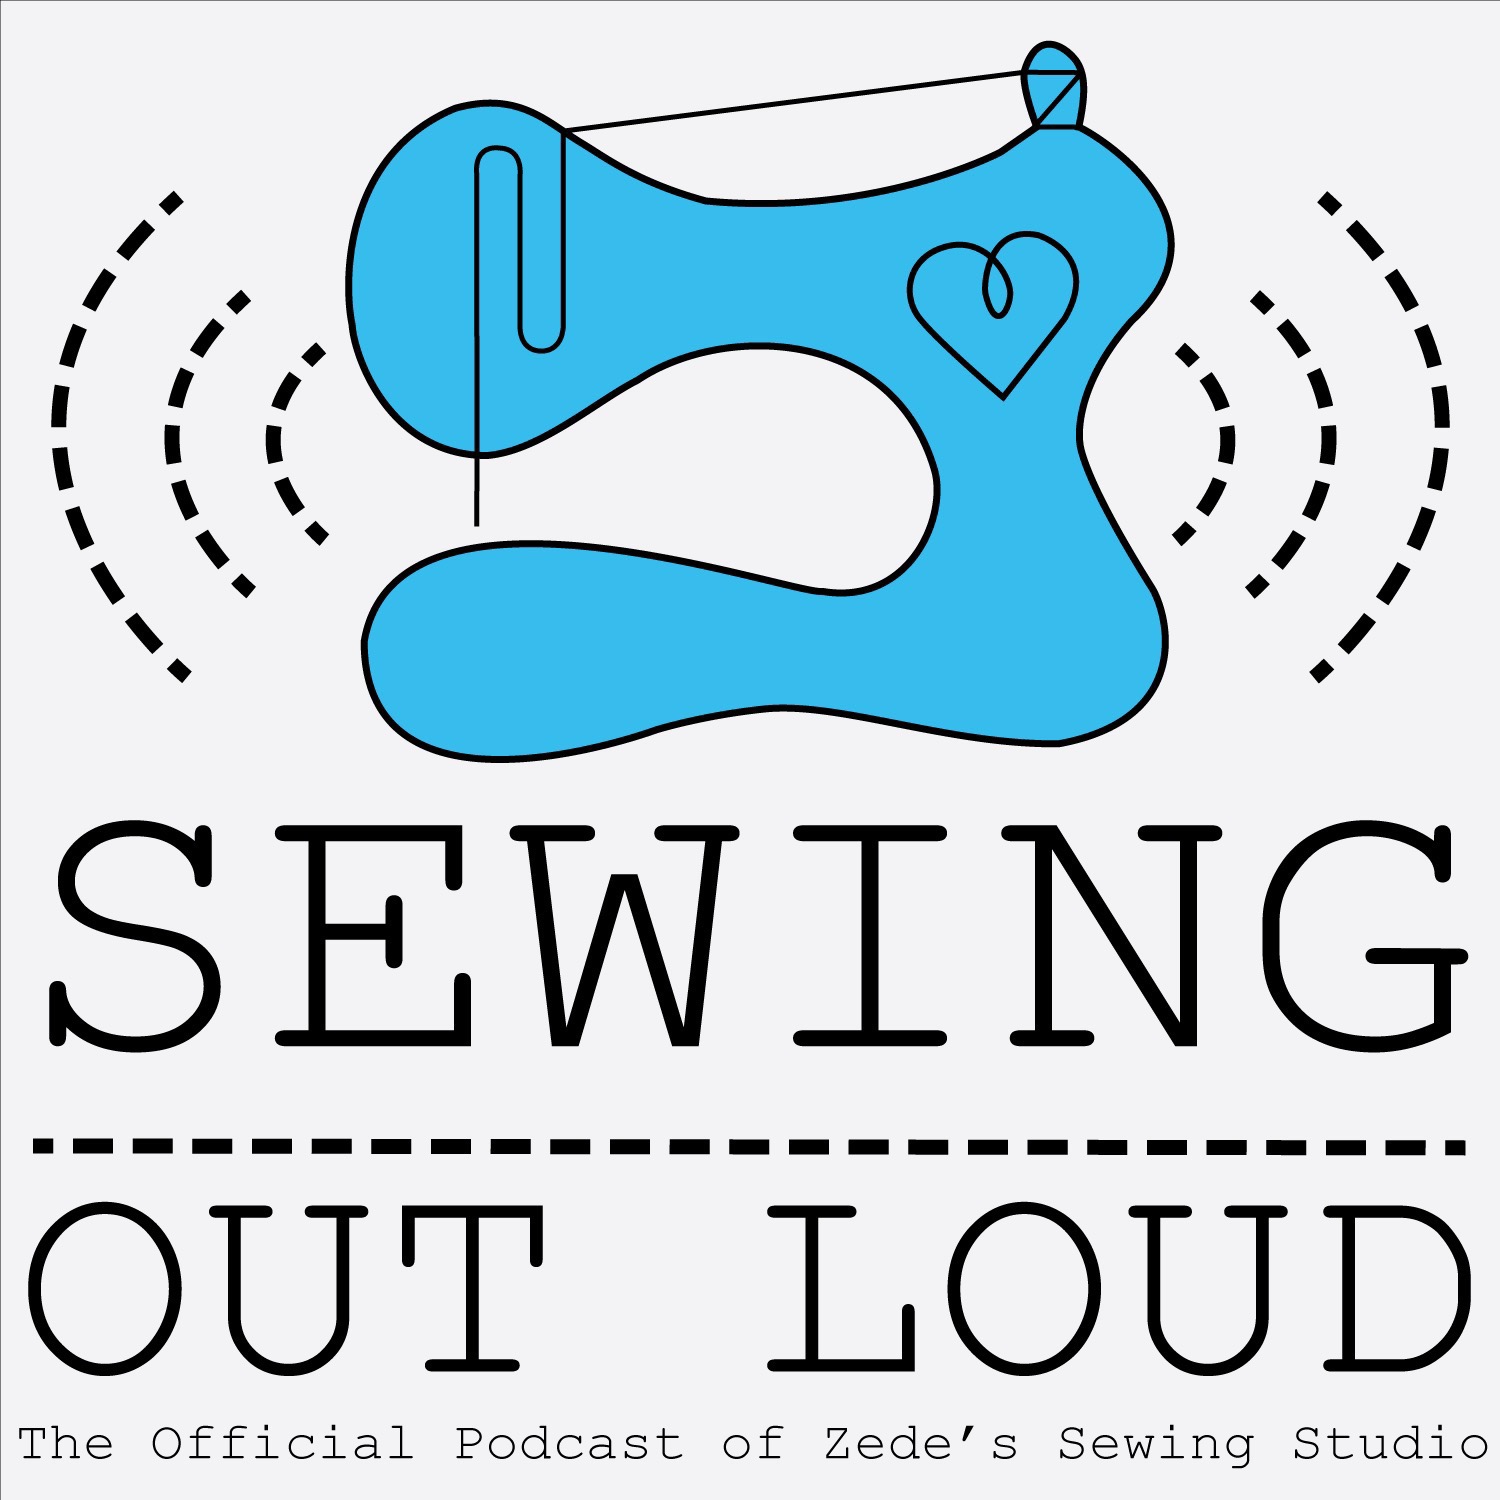 How to Organize Ongoing Sewing Projects